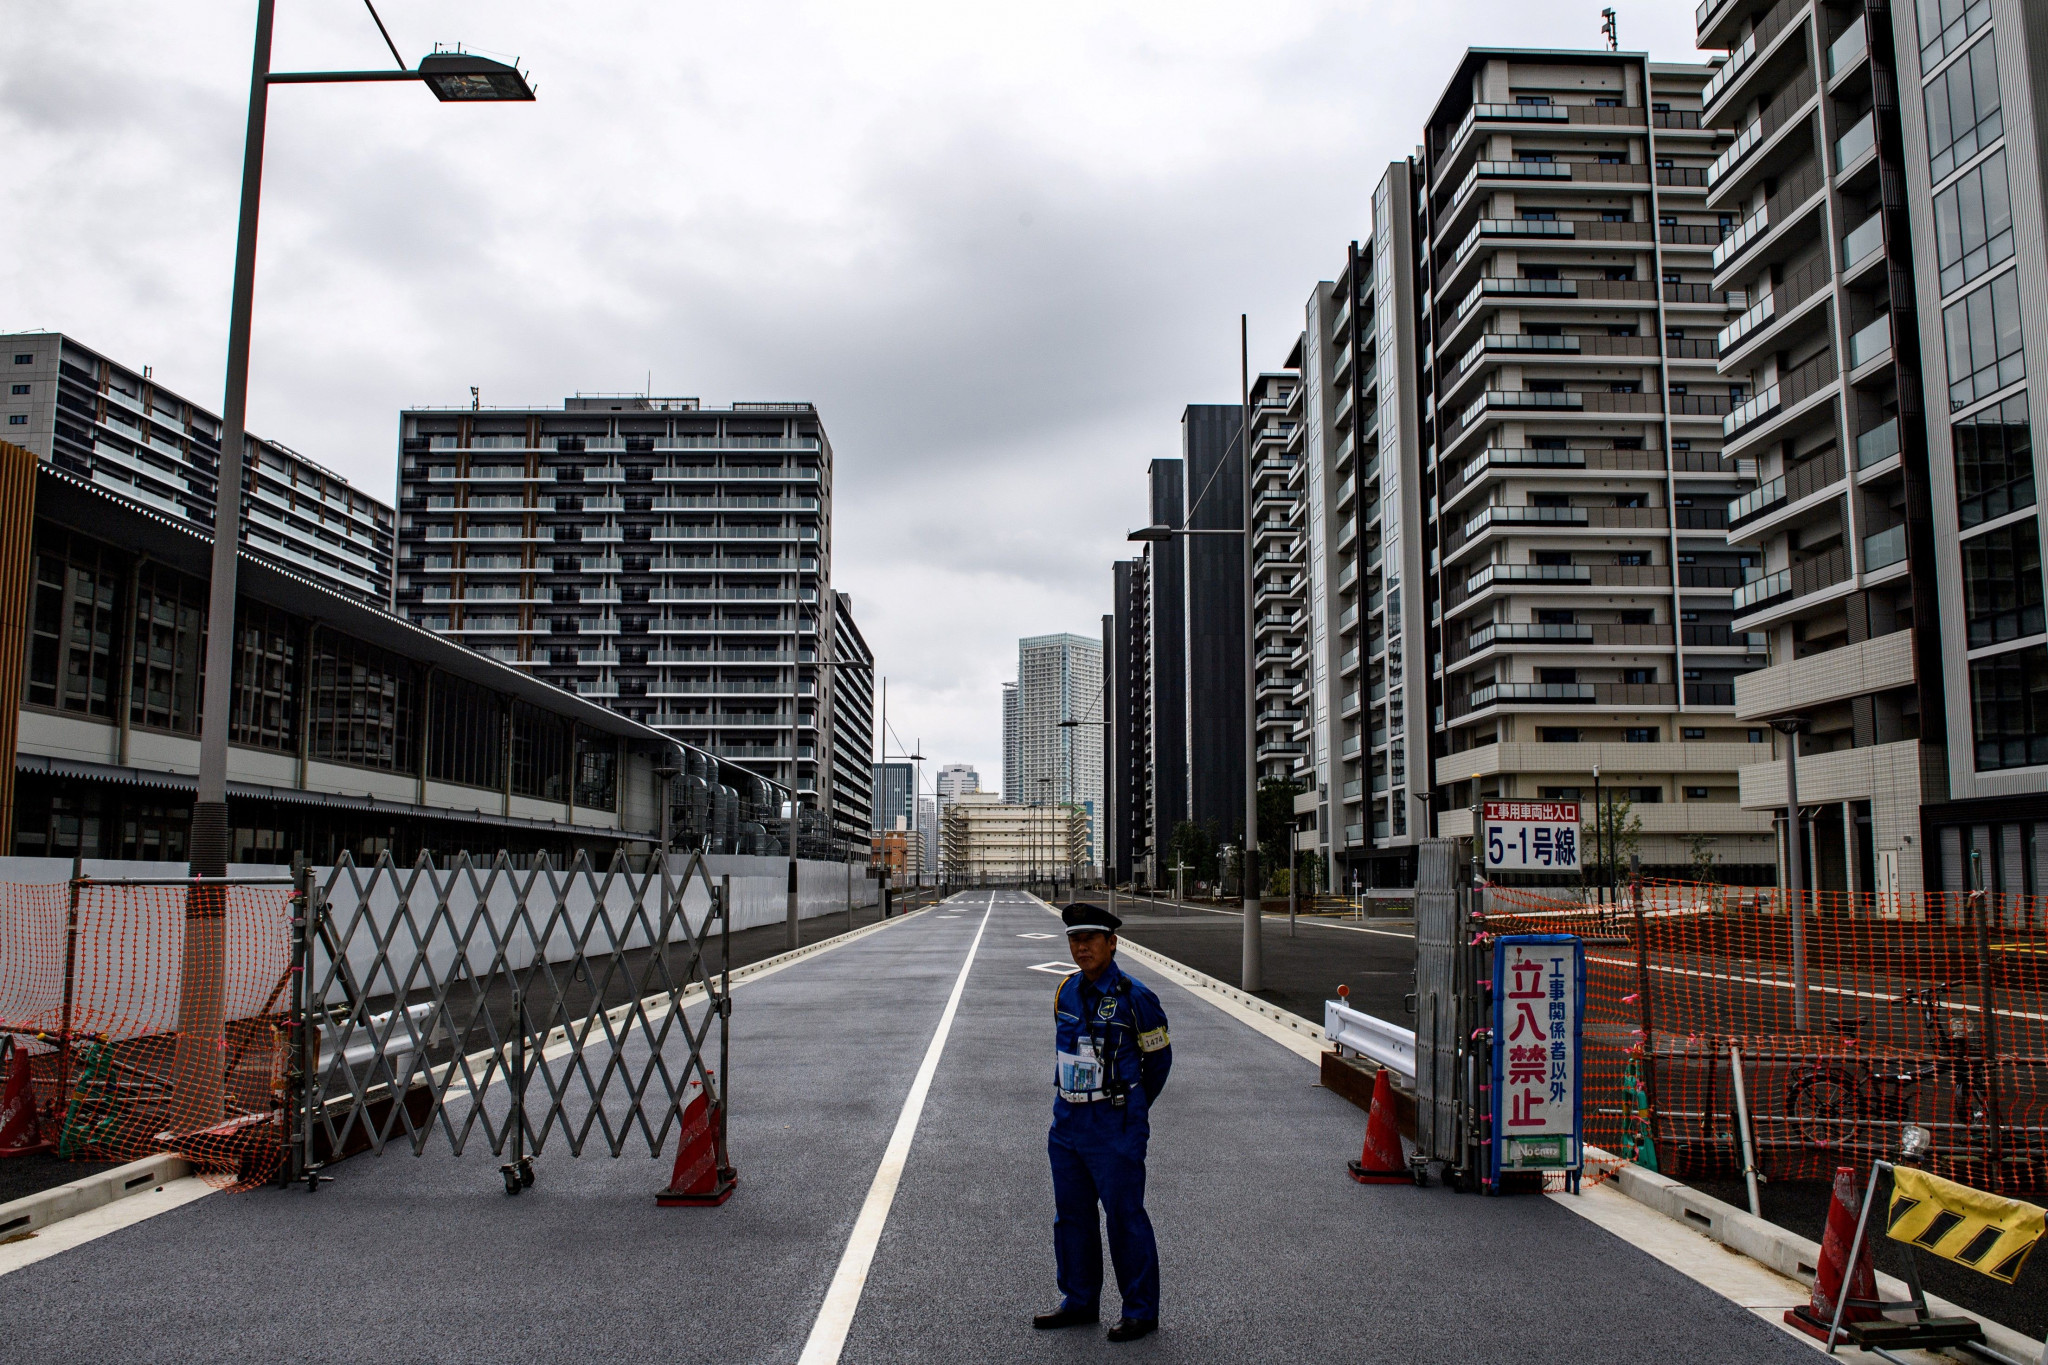 Athletes will be limited to the Athletes' Village and venues at Tokyo 2020 ©Getty Images